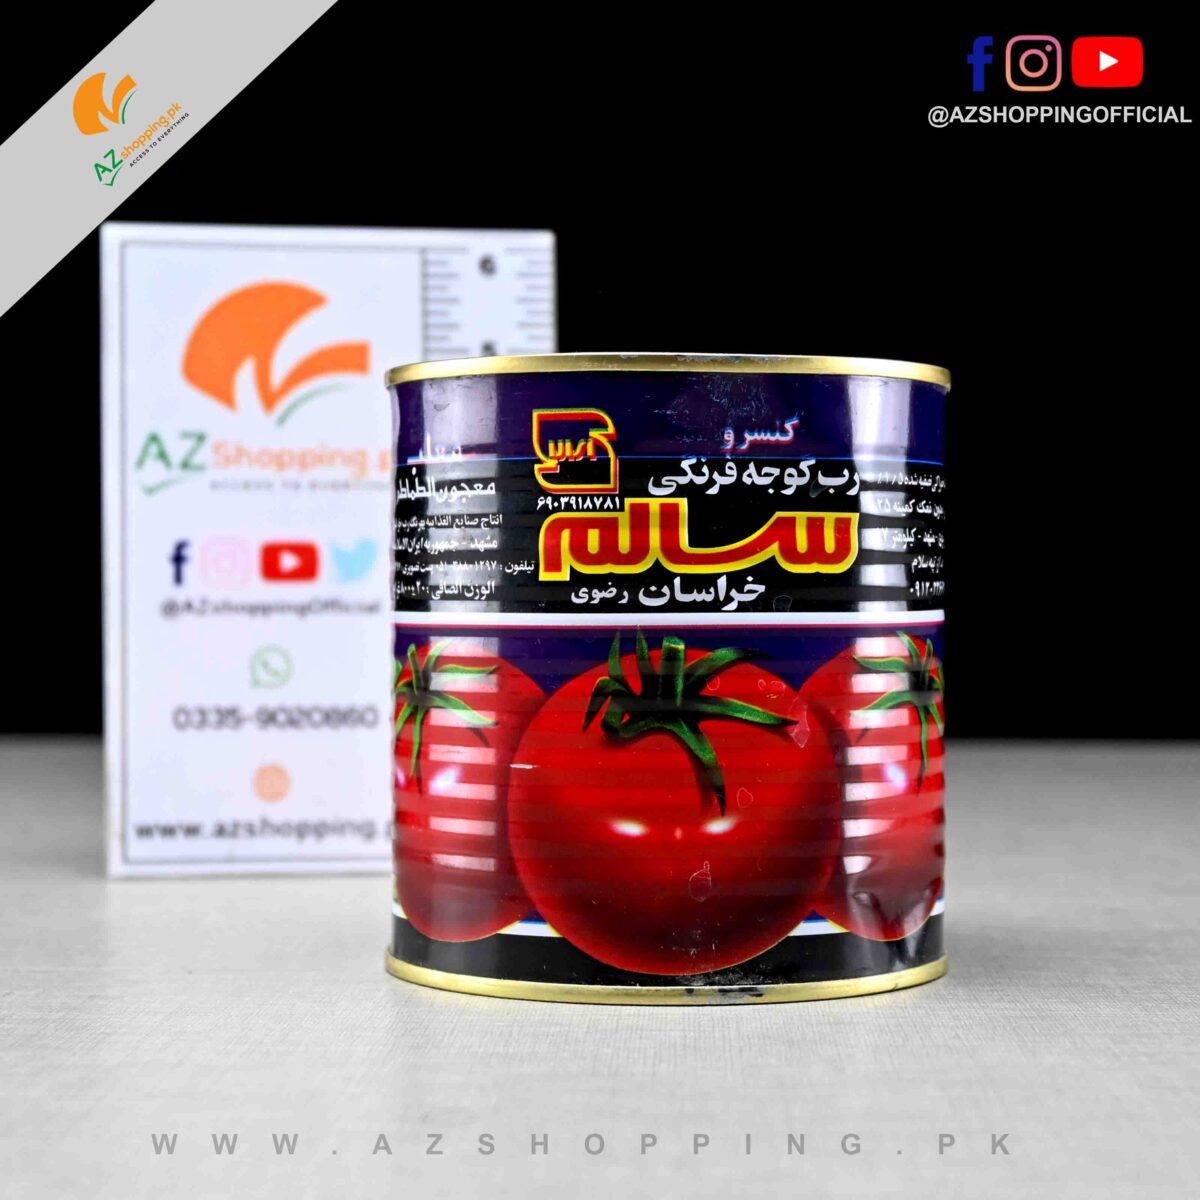 Canned Tomato Paste – Net Weight: 800g